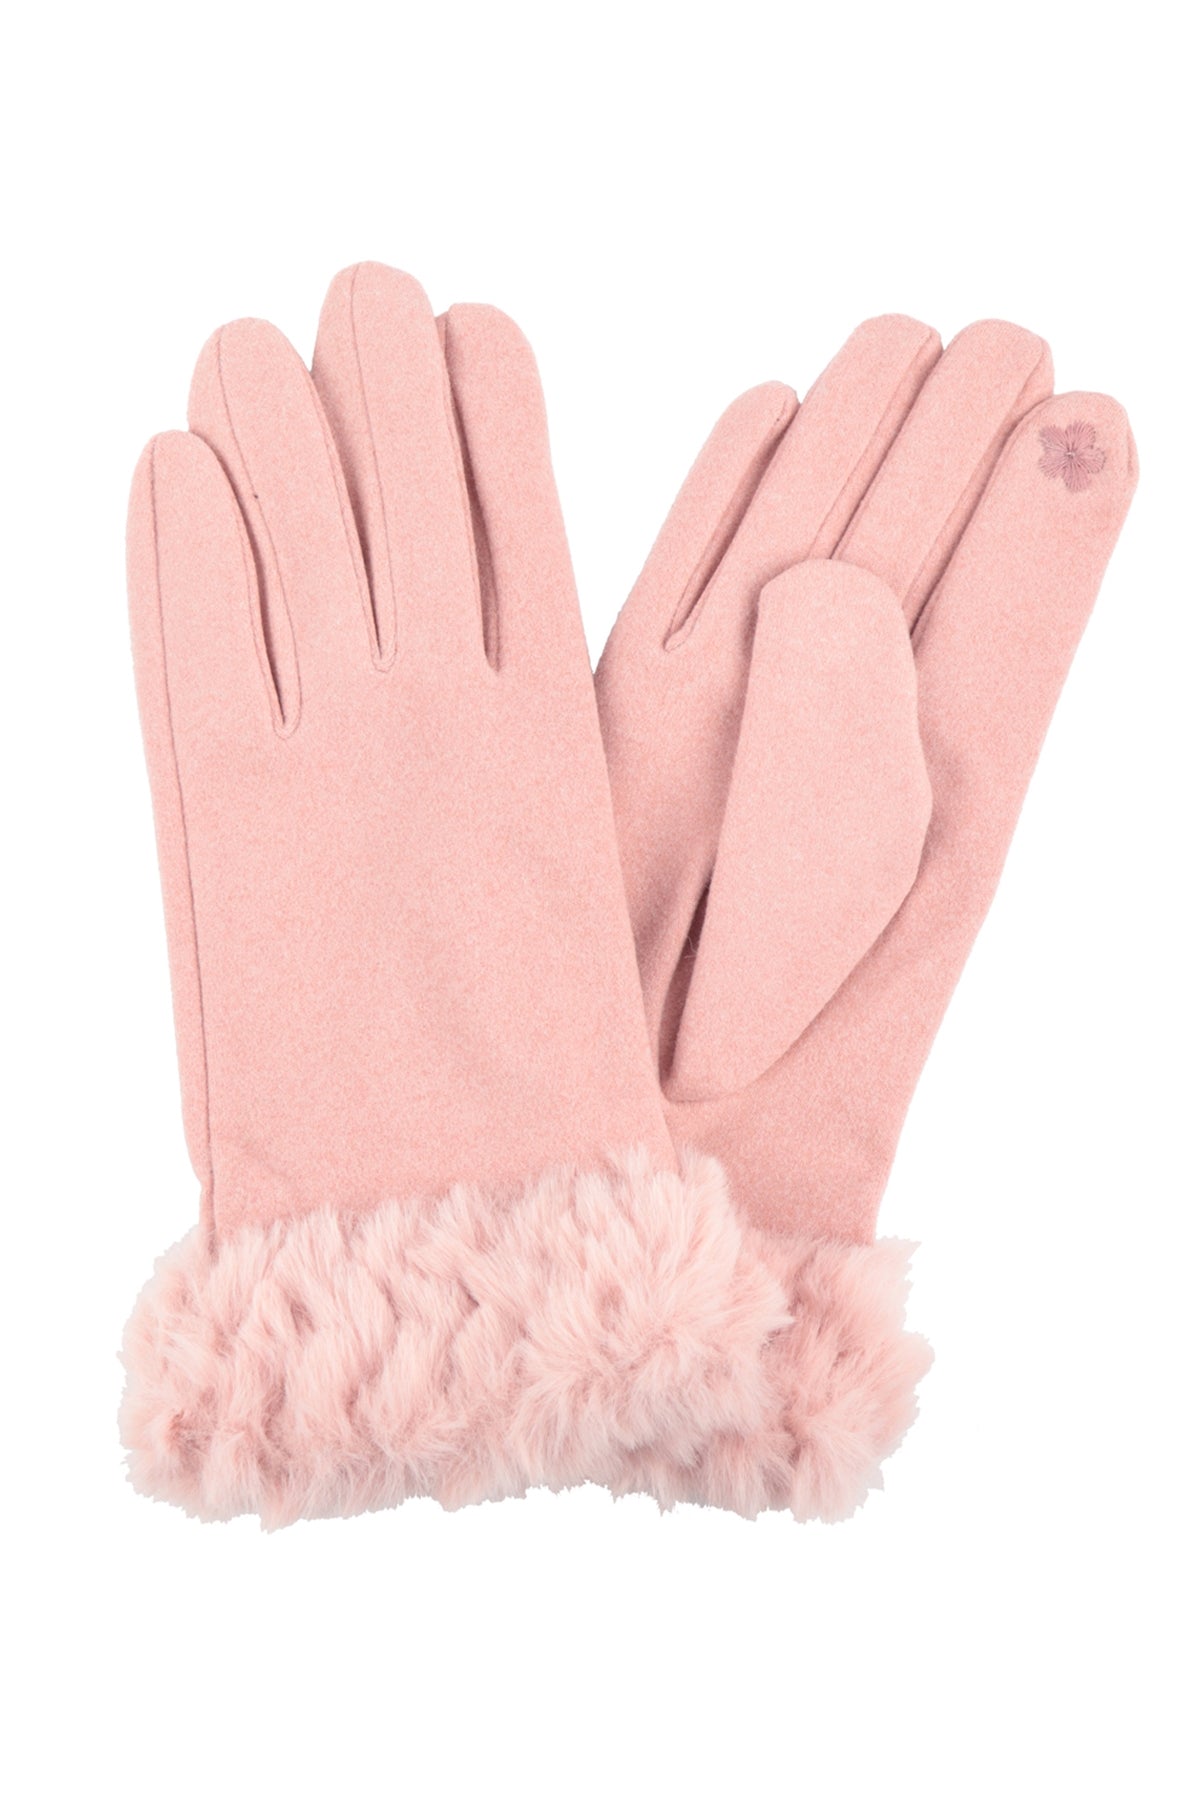 FLEECE SHERPA SMART TOUCH GLOVES/6PCS (NOW $2.75 ONLY!)